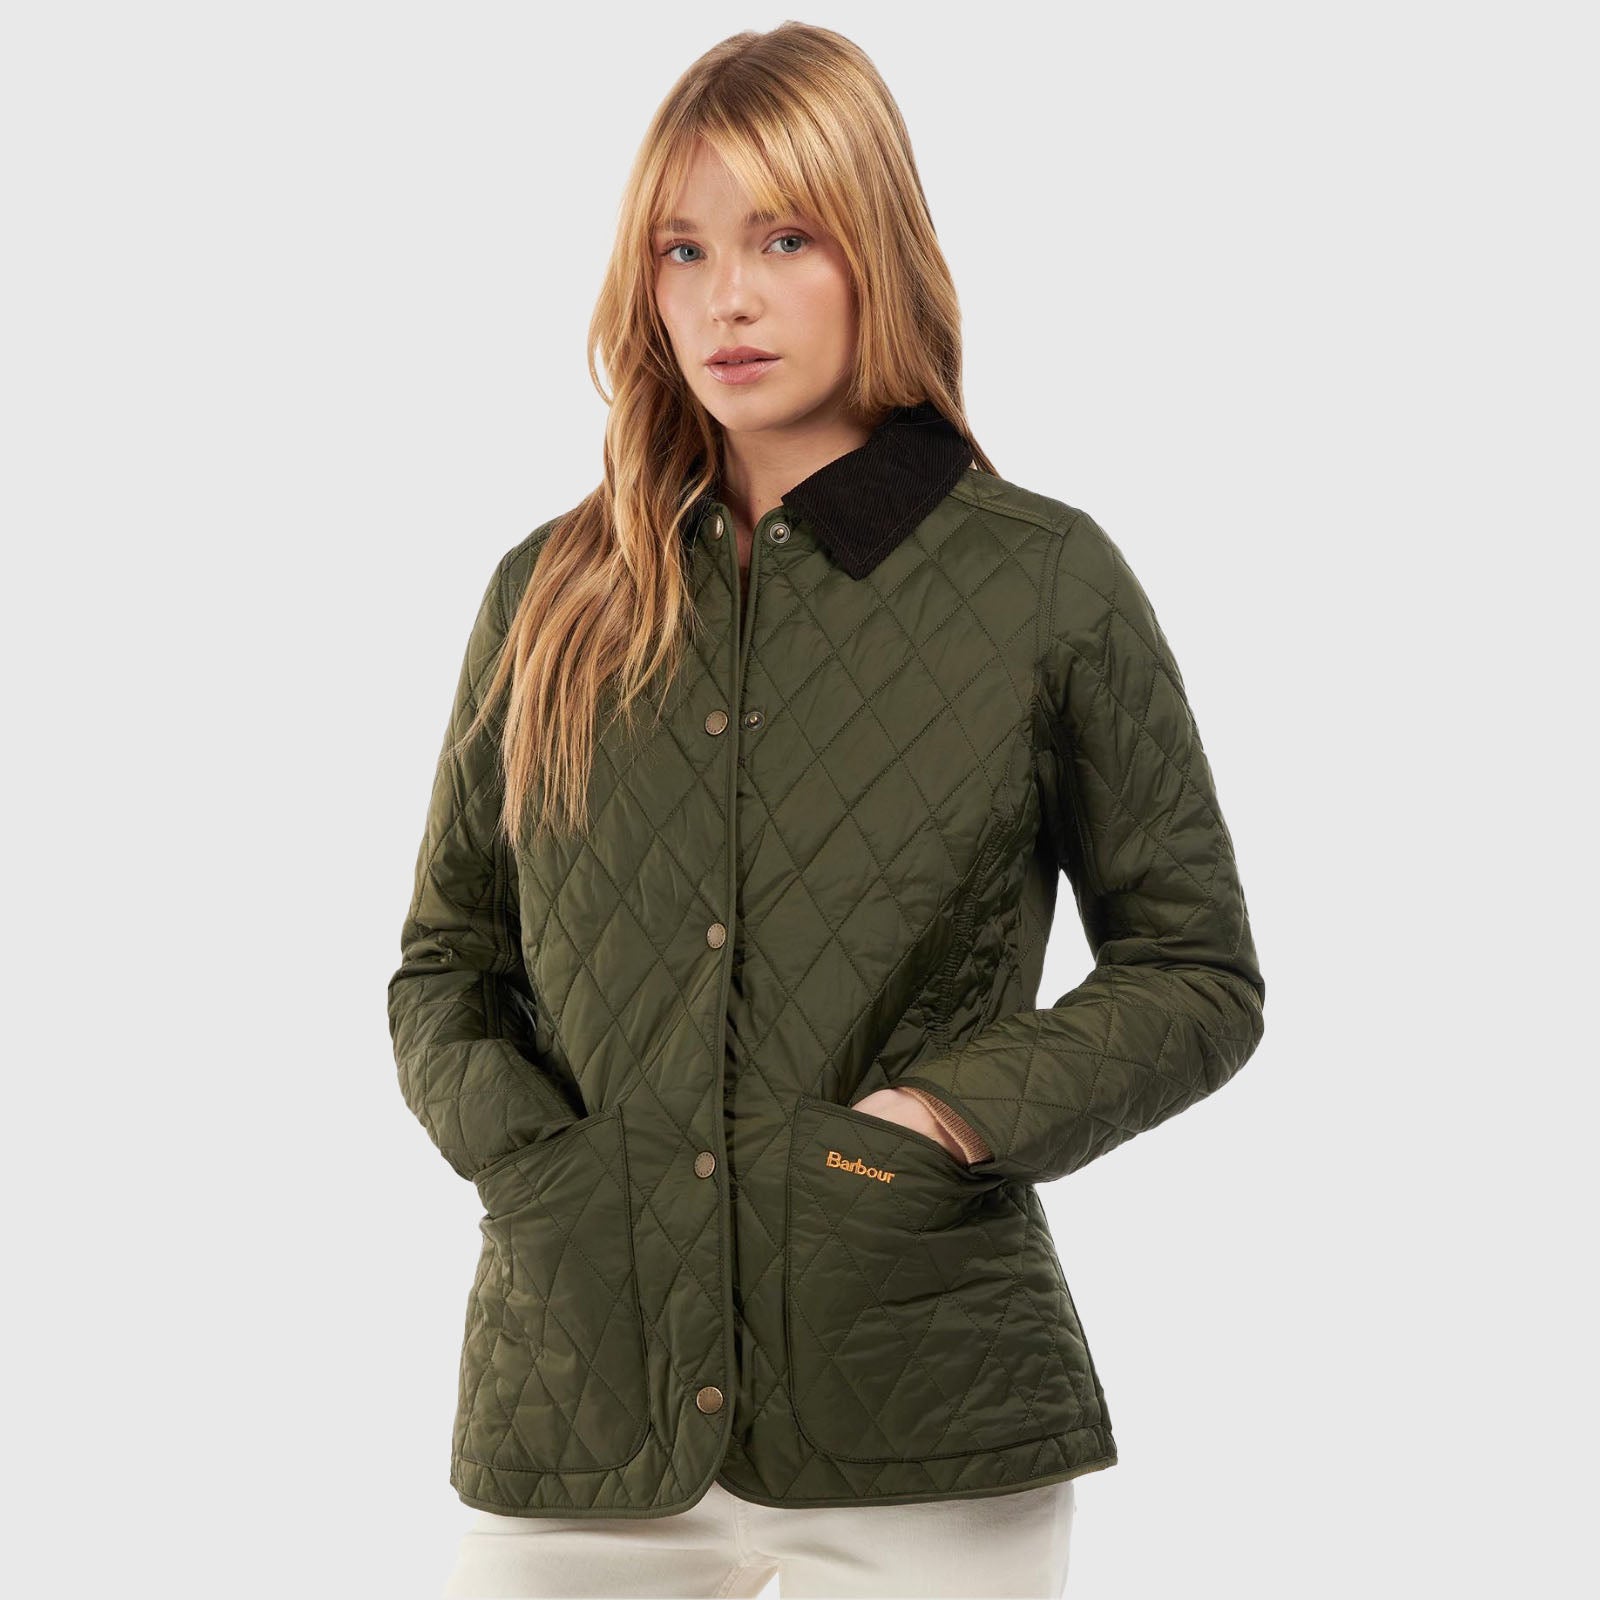 Barbour Annandale Quilted Jacket in Synthetic Olive Green - 6